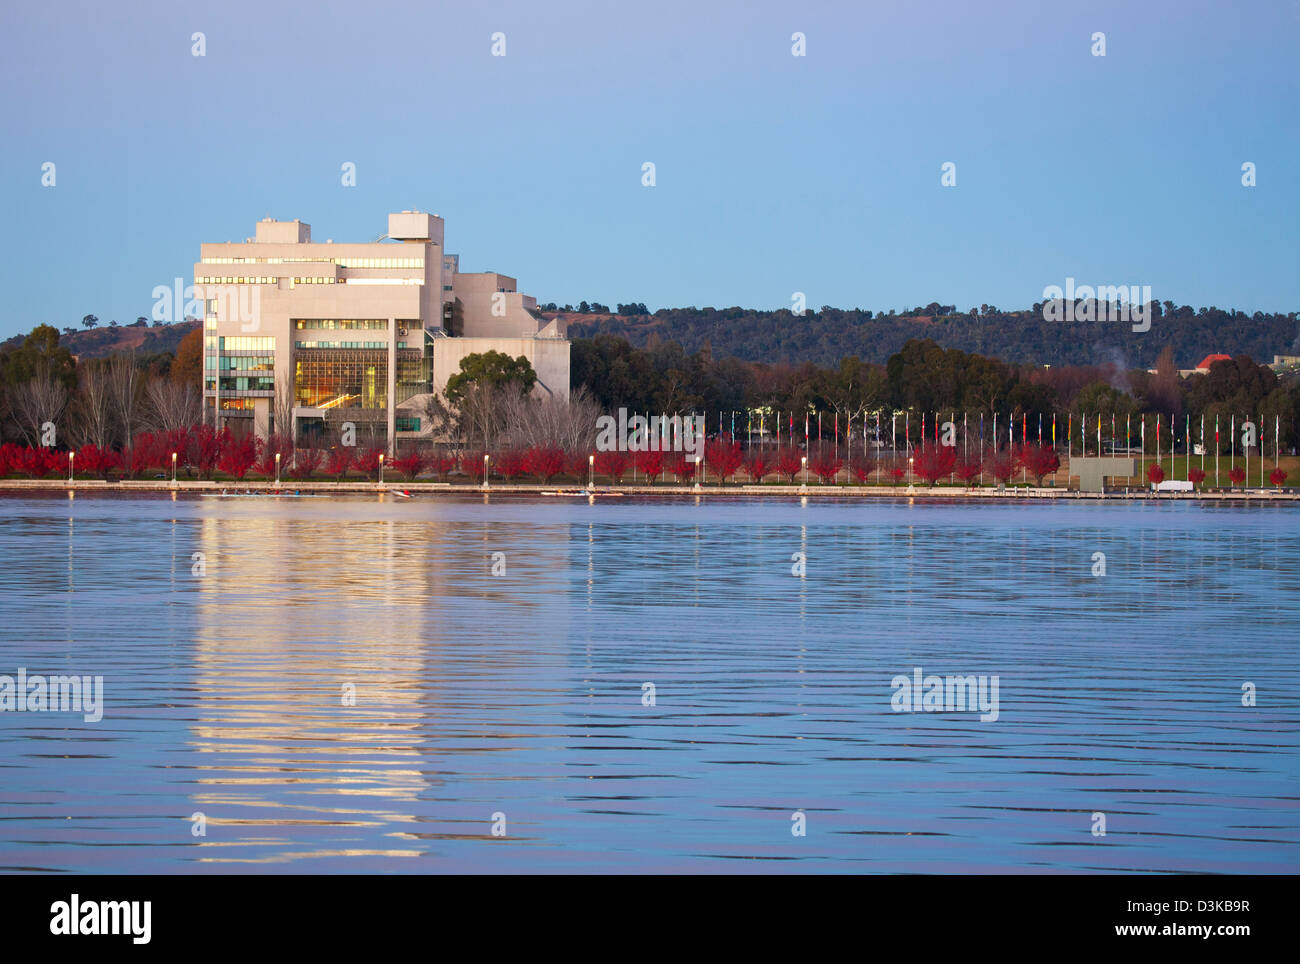 The High Court of Australia building is an outstanding example of late modern Brutalist architecture Canberra Australia Stock Photo